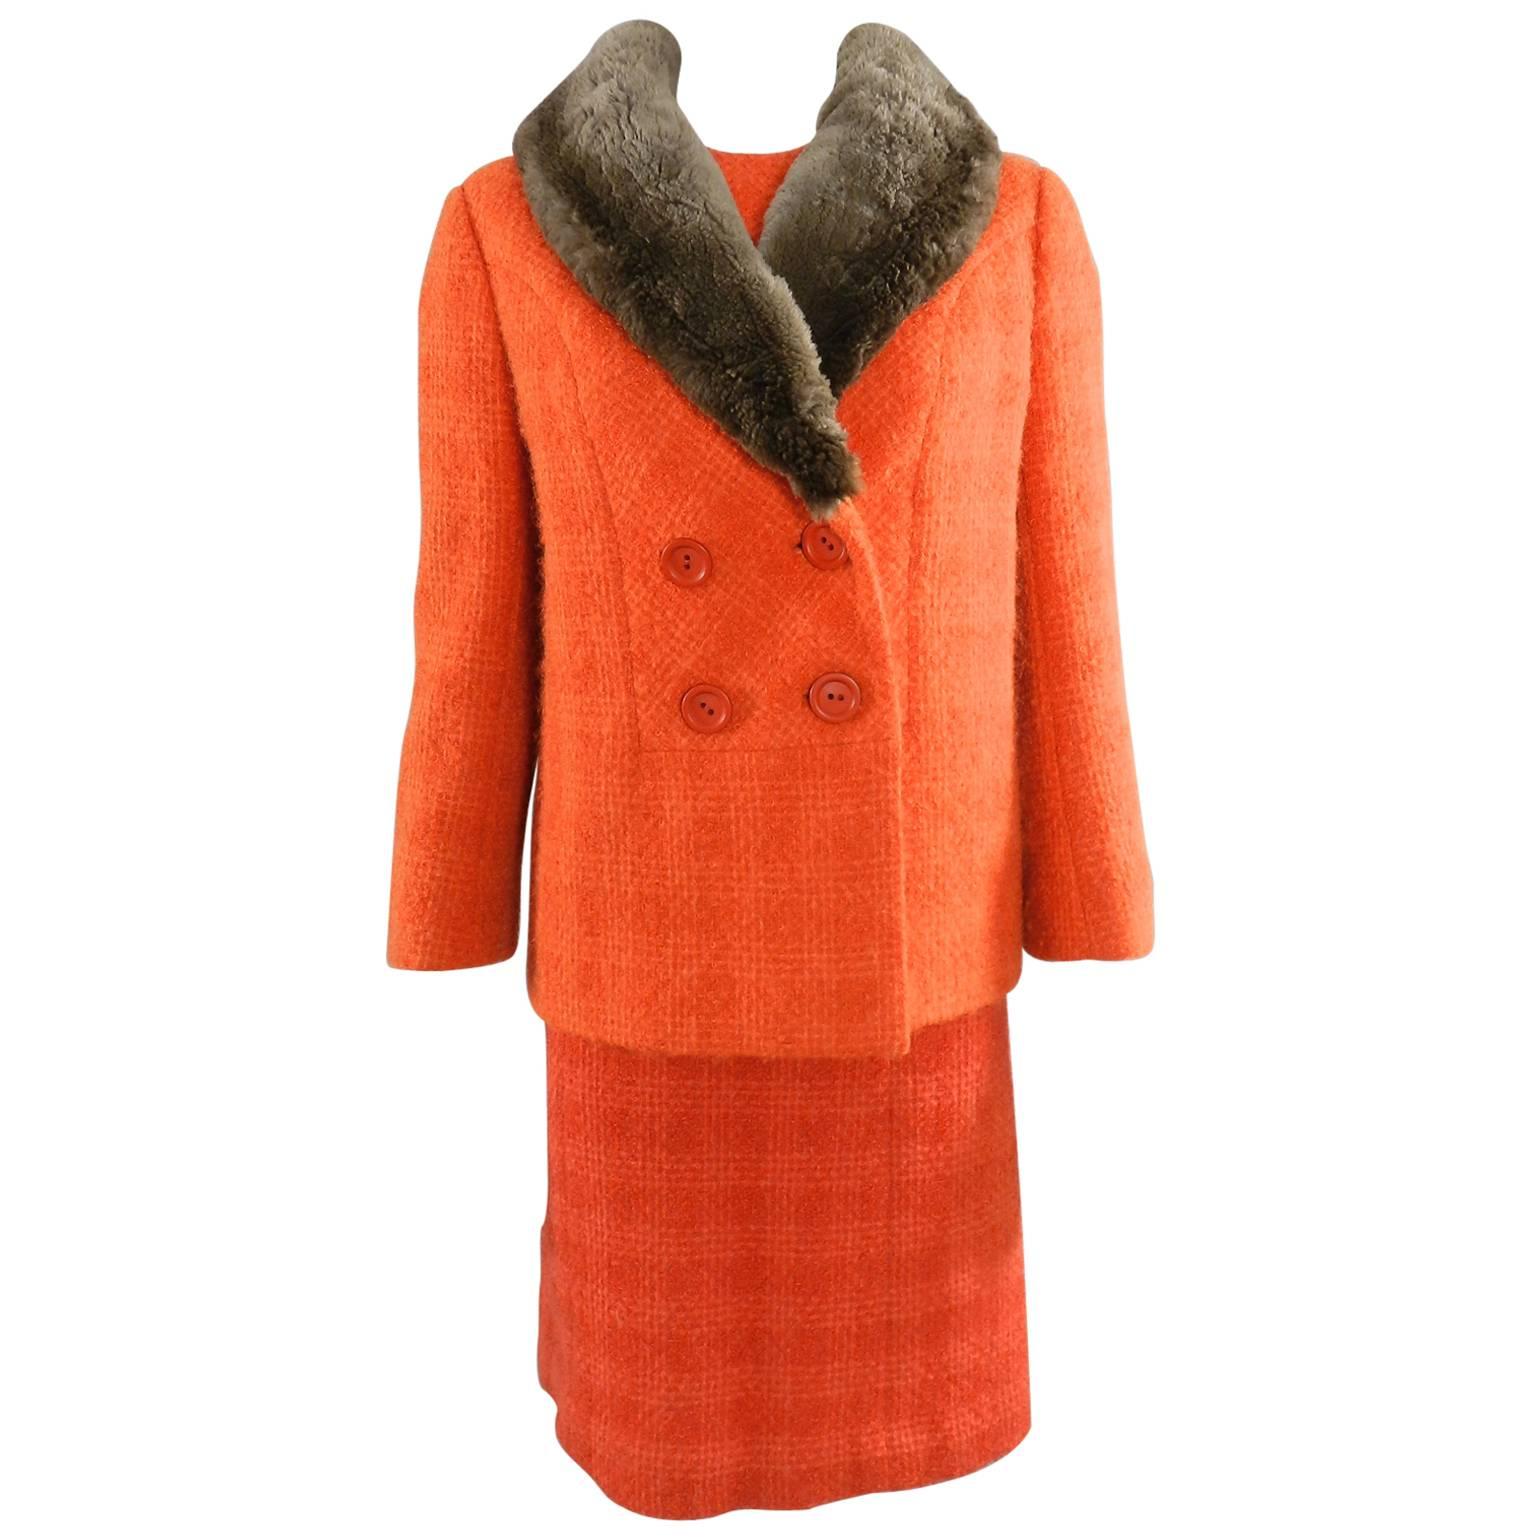 Norman Hartnell Vintage Orange Wool Dress and Jacket Suit, early 1960s 